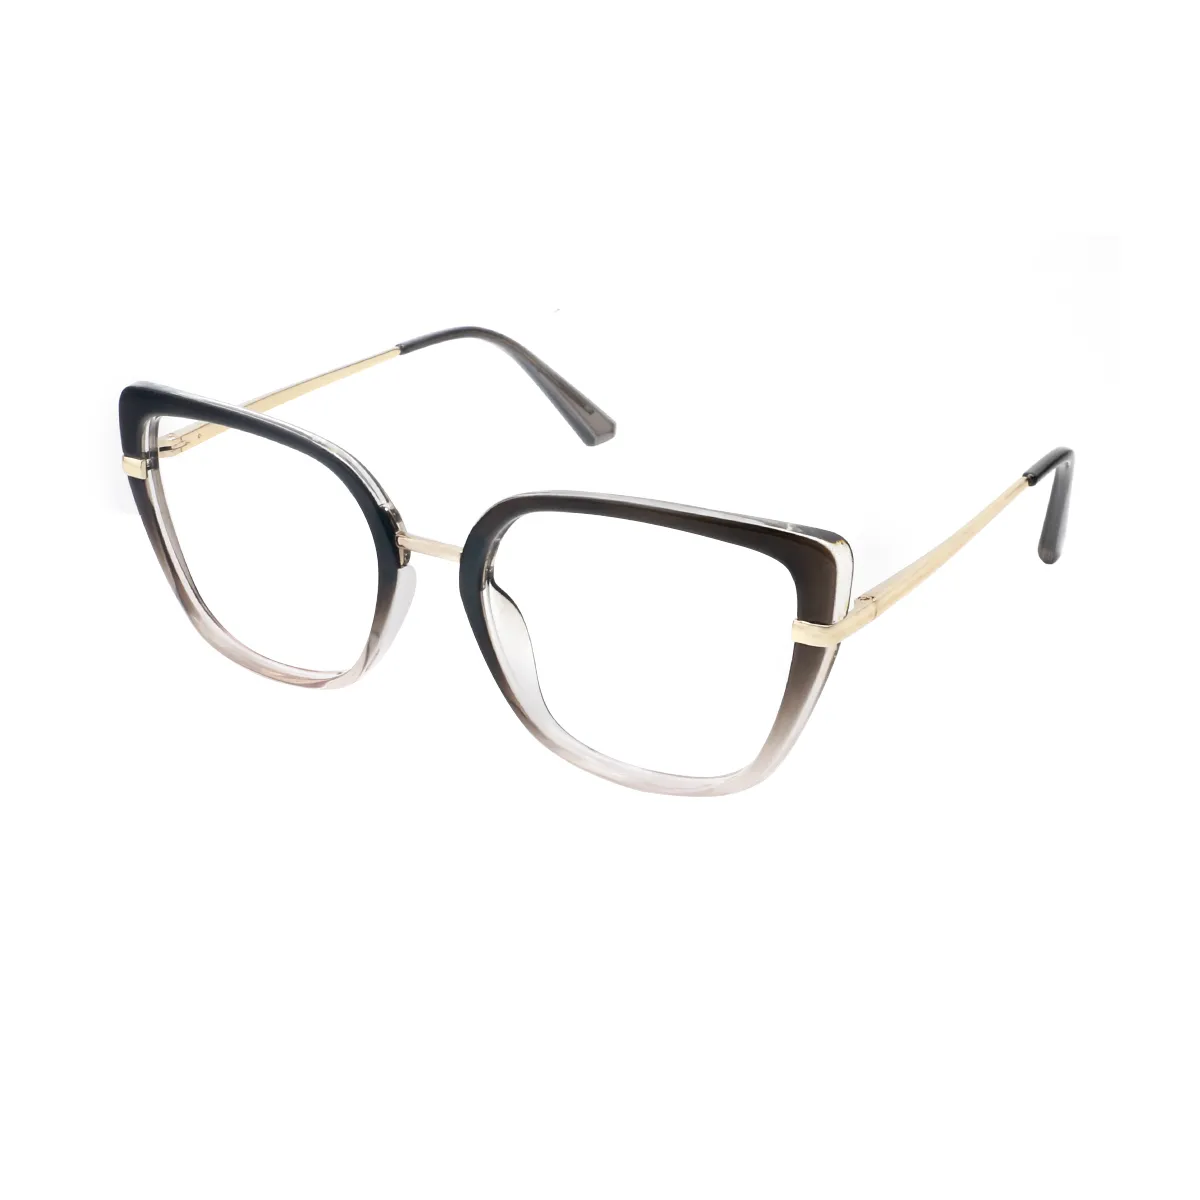 Olympia - Square Gray Glasses for Women